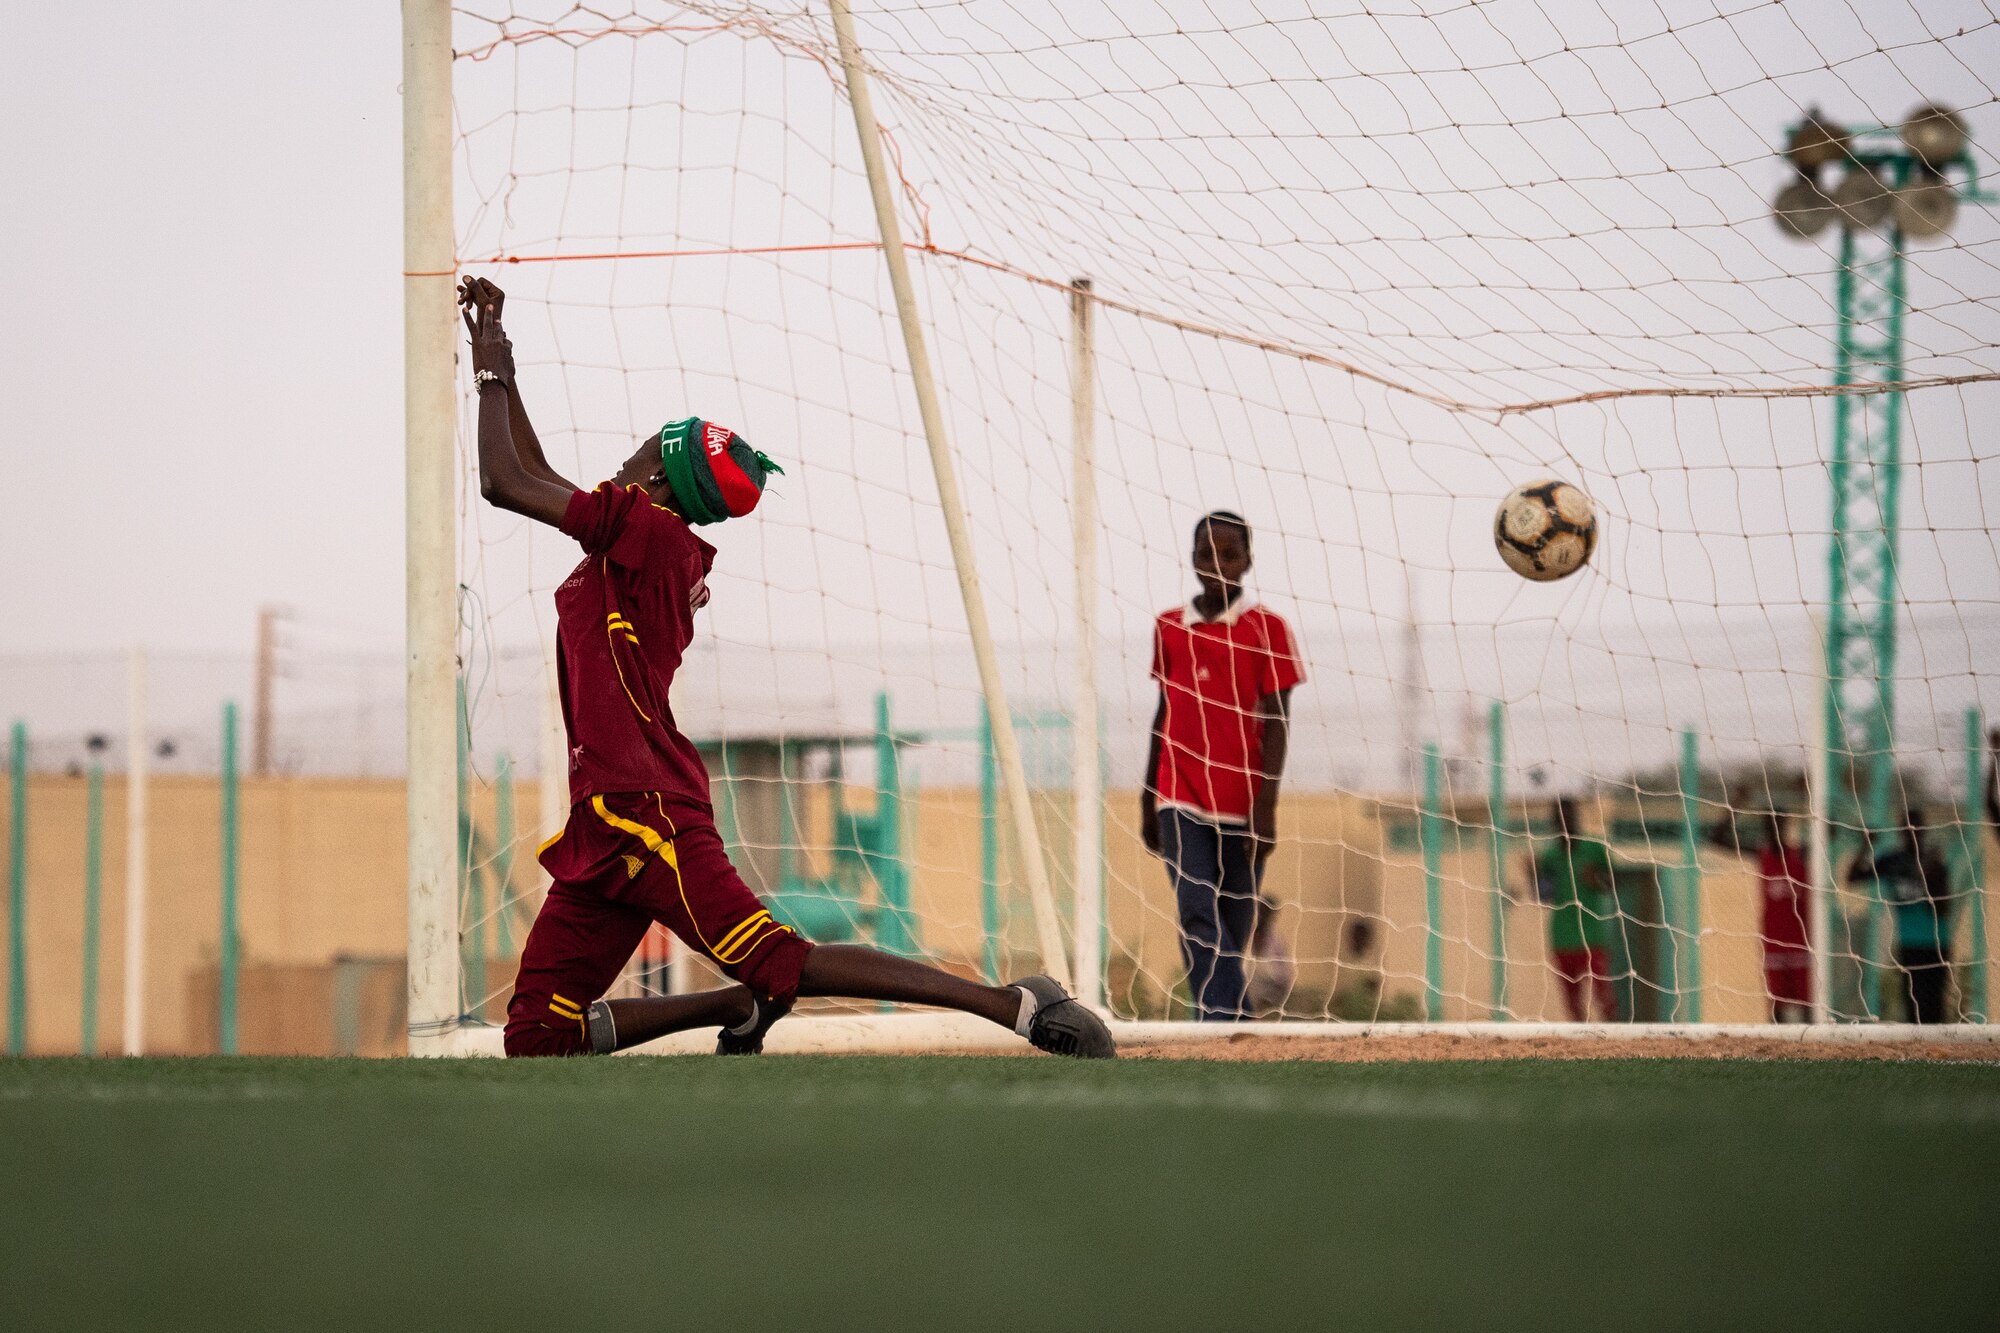 The goalie for the Nassara Athletic Club Women’s Soccer Team misses the ball while blocking during a recreational game between Nigerien Air Base 201 and the Nassara Athletic Club Women’s Soccer Team at the Agadez Sports Stadium in Agadez, Niger, July 5, 2019. The civil affairs team held the game to build rapport and promote positive sentiment between the local community and AB 201 personnel. The game ended with a three on three shootout resulting in AB 201’s victory. (U.S. Air Force photo by Staff Sgt. Devin Boyer)